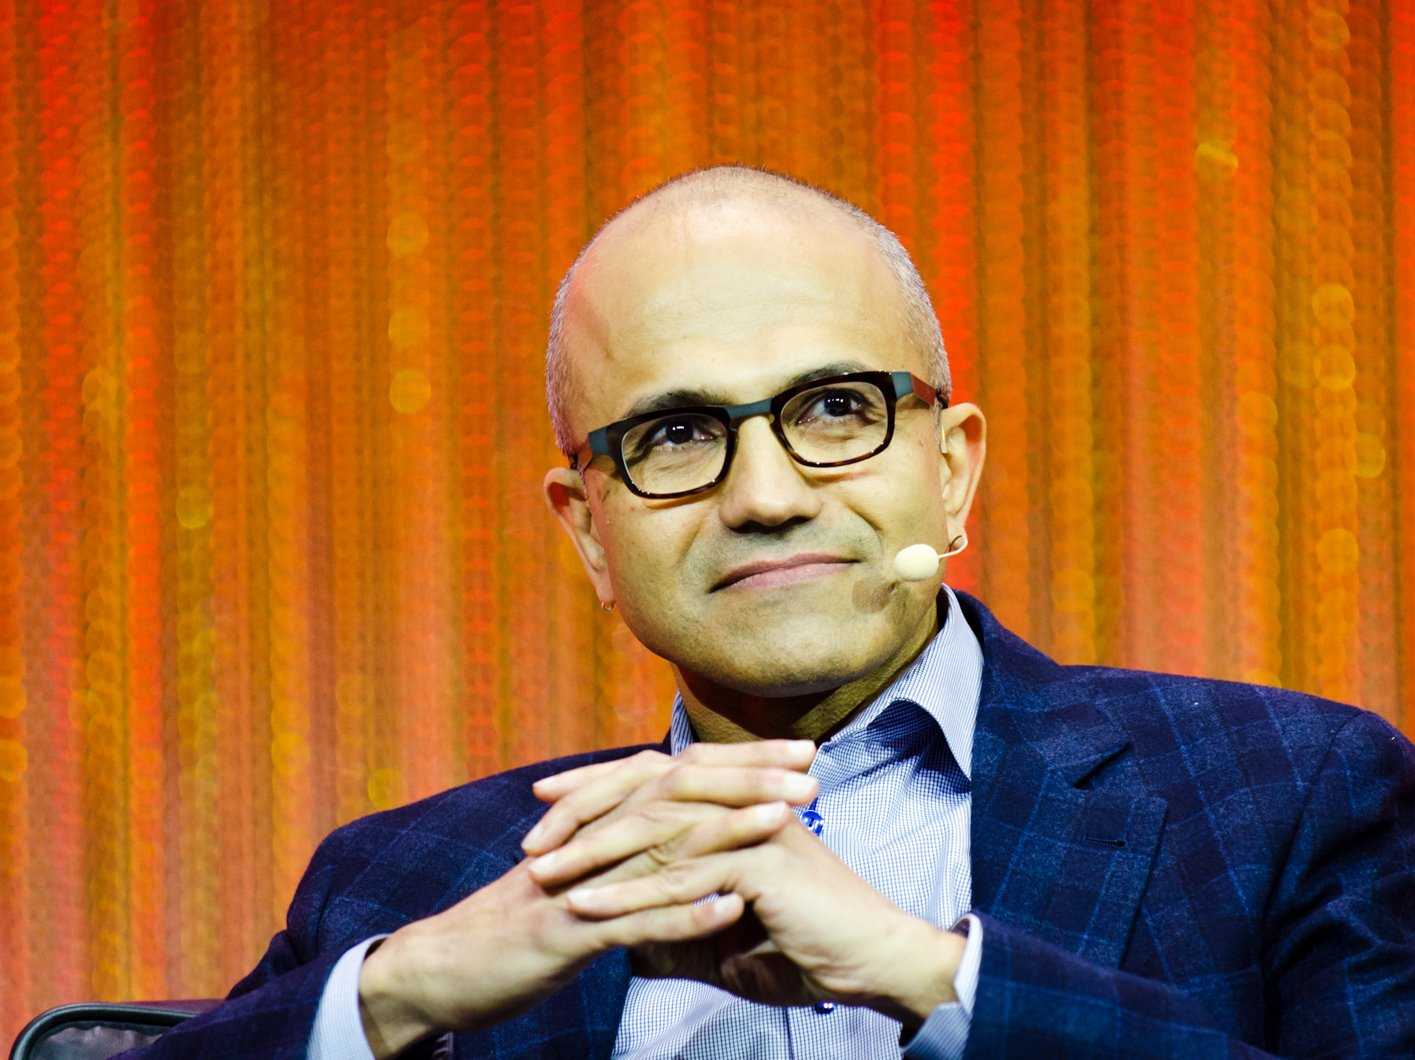 Current Microsoft CEO Satya Nadella has a reputation as someone who cuts middle management.